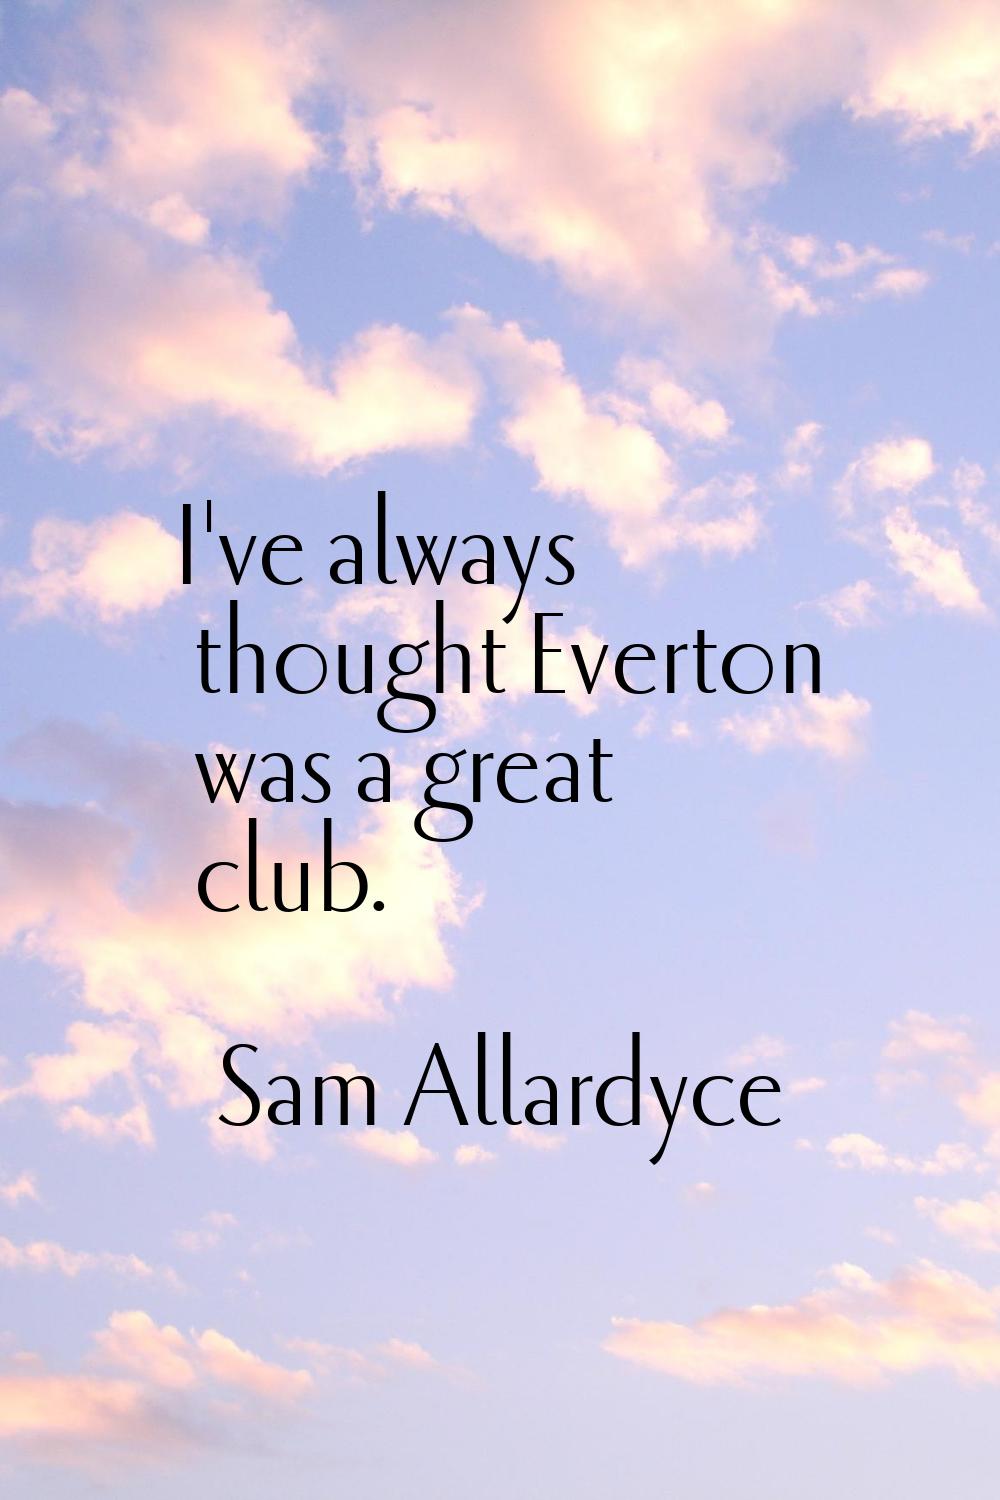 I've always thought Everton was a great club.